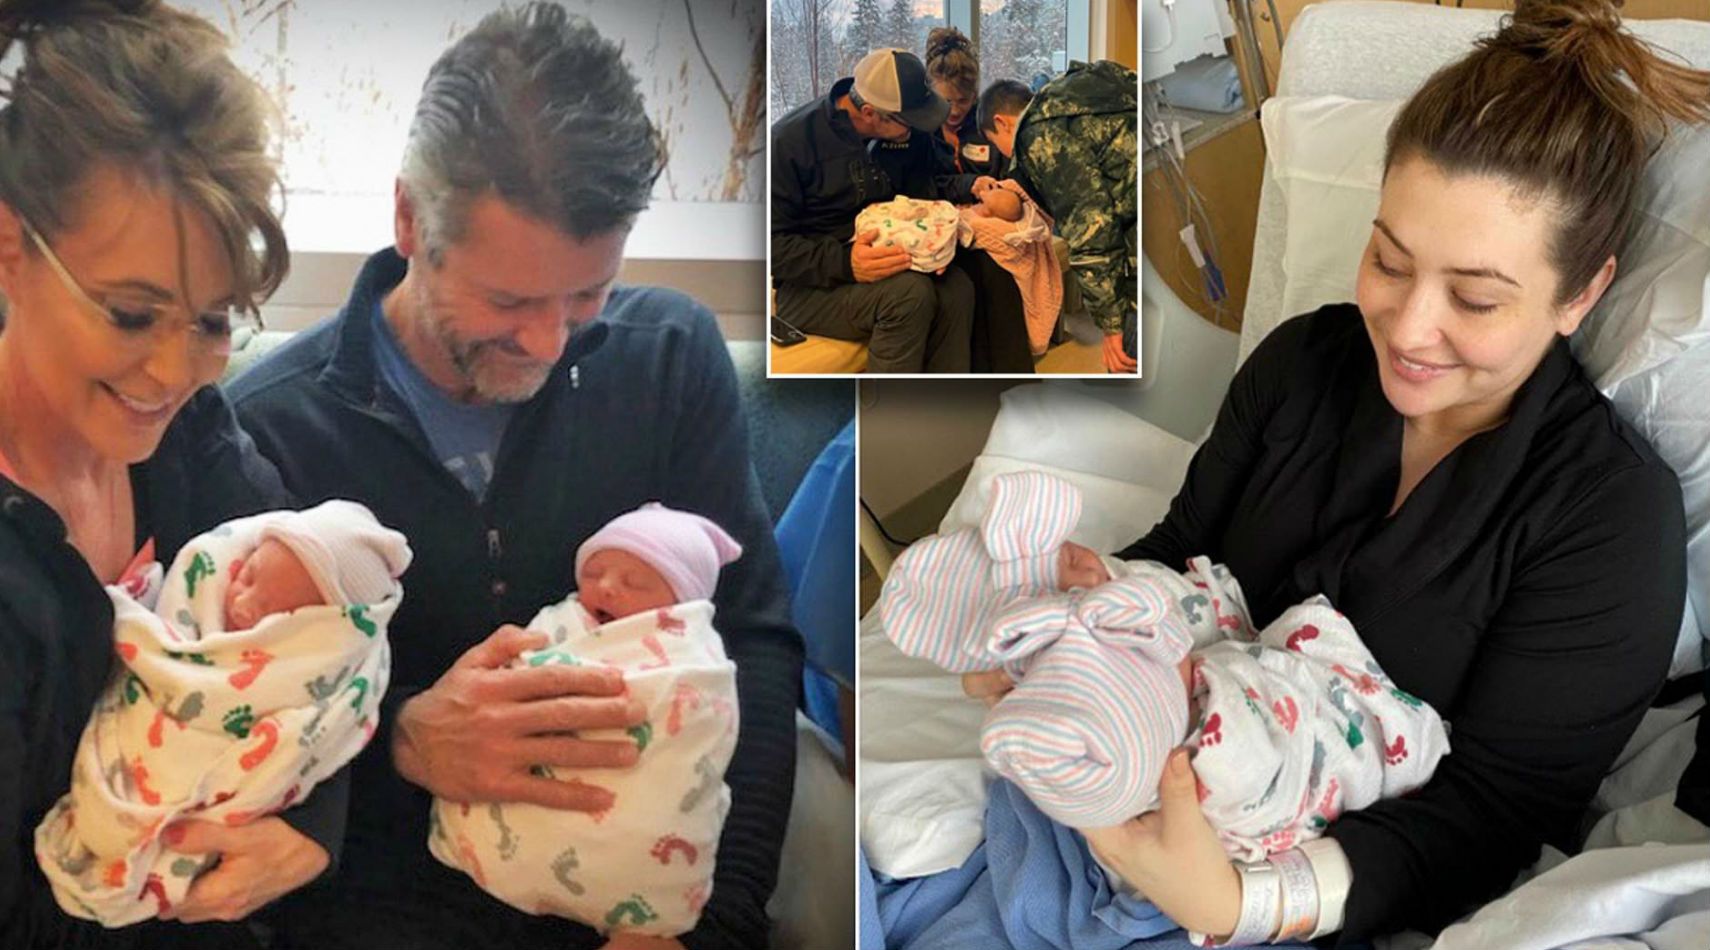 Sarah Palins Daughter Willow Gives Birth To Twin Girls